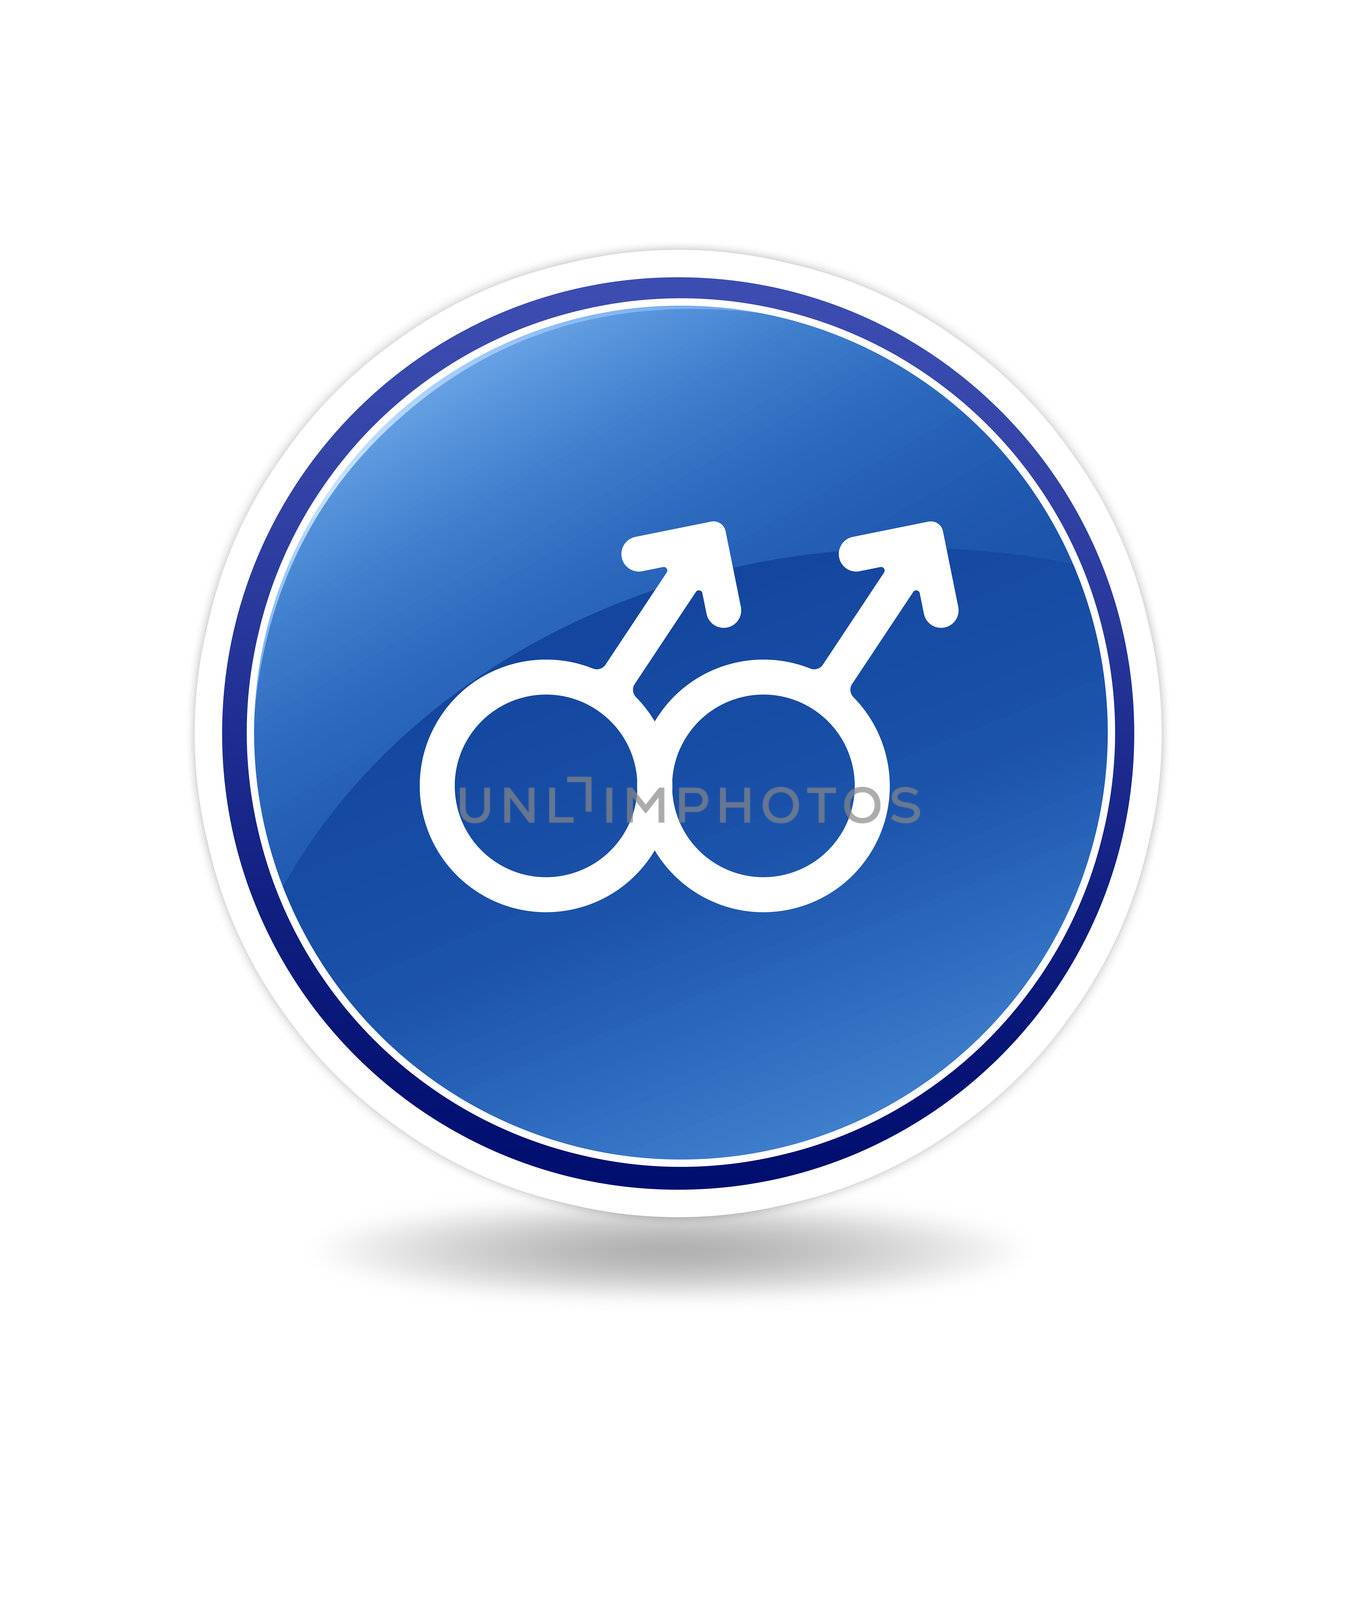 High resolution graphic icon of a homosexual male symbol.